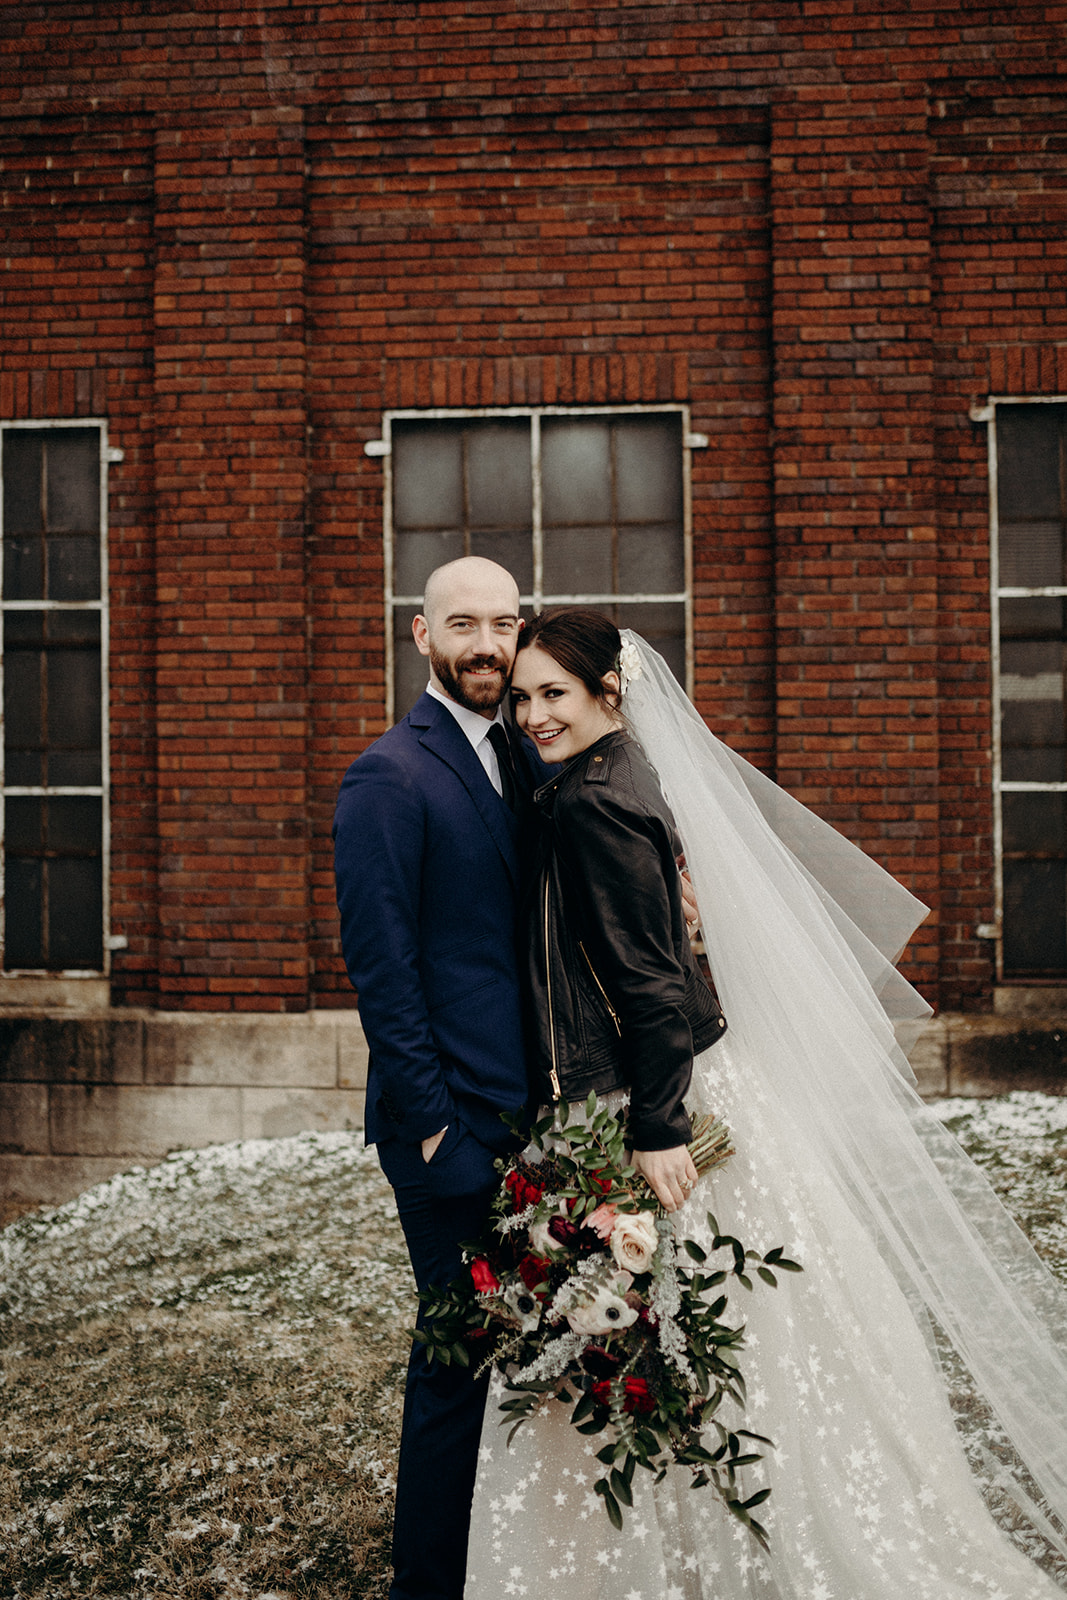 Next morning bride and groom photos! Lush bridal bouquet with peonies, garden roses, and anemones. Nashville, TN luxury wedding floral design with the bride in a leather jacket!!